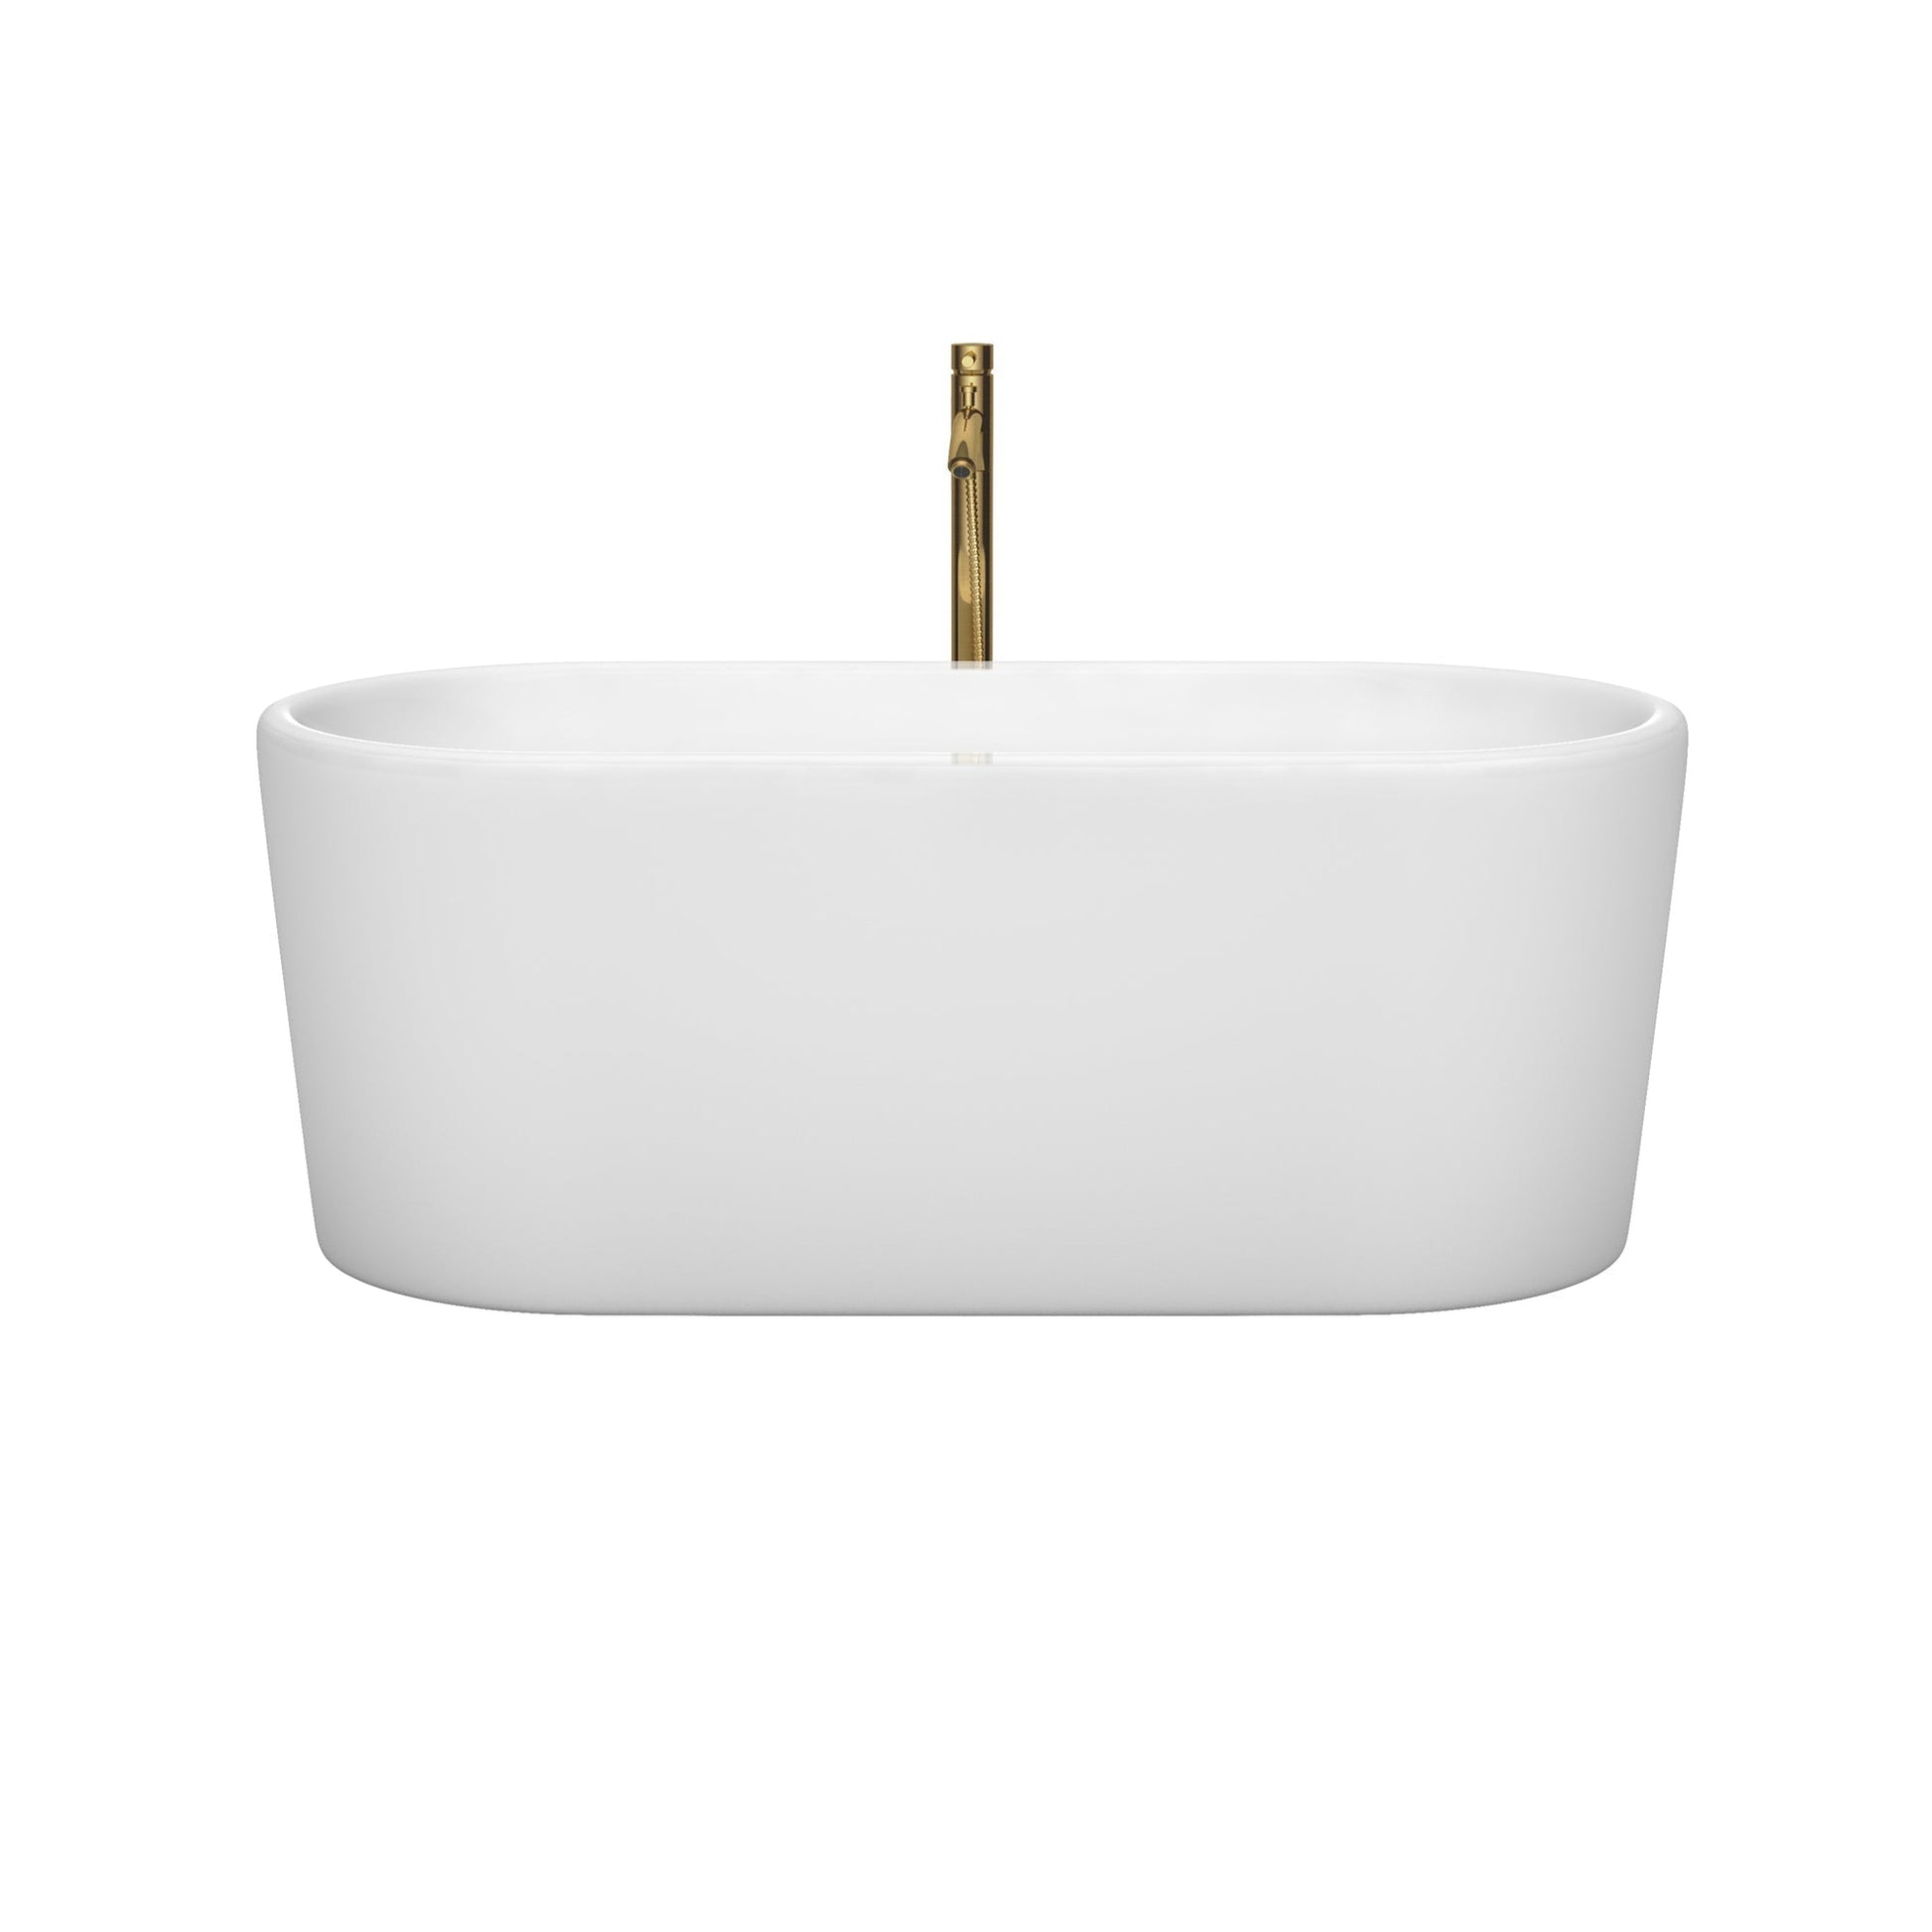 Wyndham Collection Ursula 59" Freestanding Bathtub in White With Polished Chrome Trim and Floor Mounted Faucet in Brushed Gold